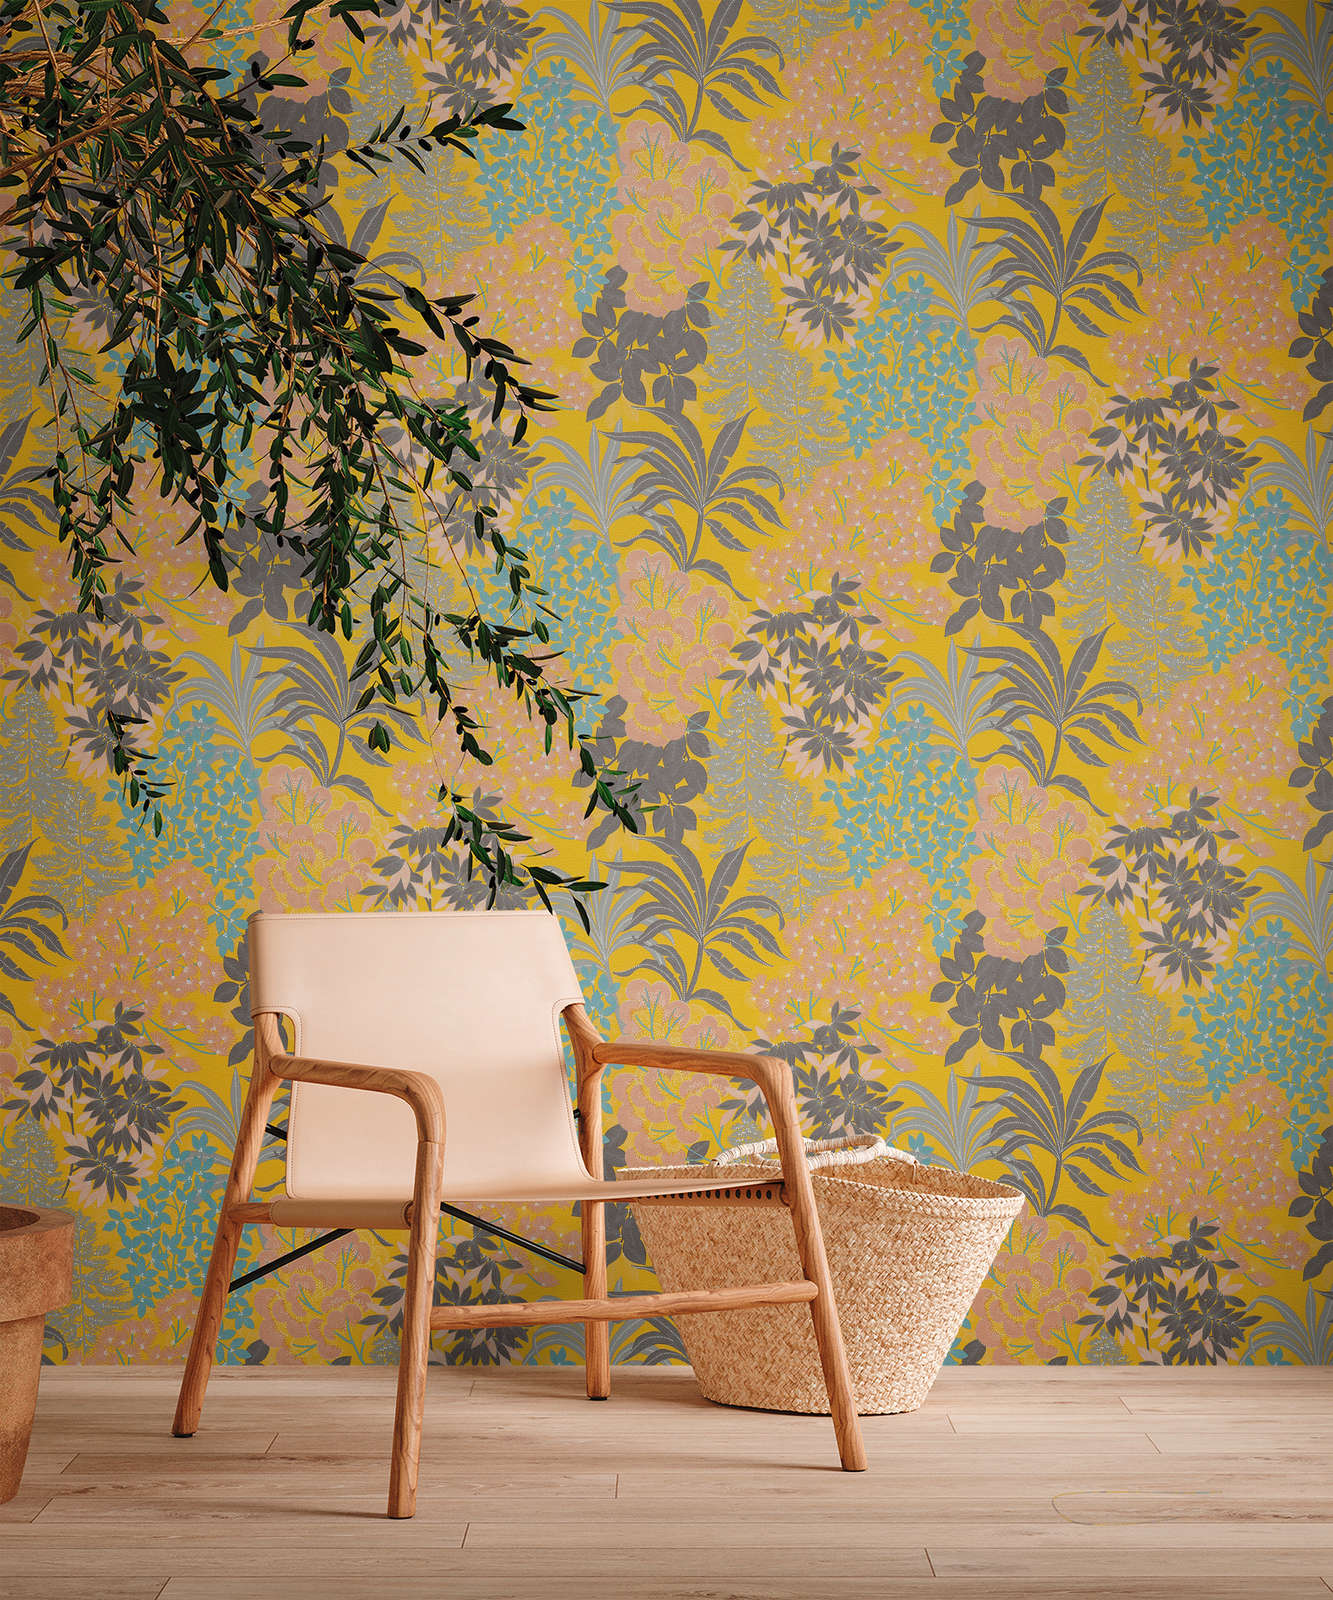             Eye-catching floral wallpaper in bold colours - yellow, black, pink
        